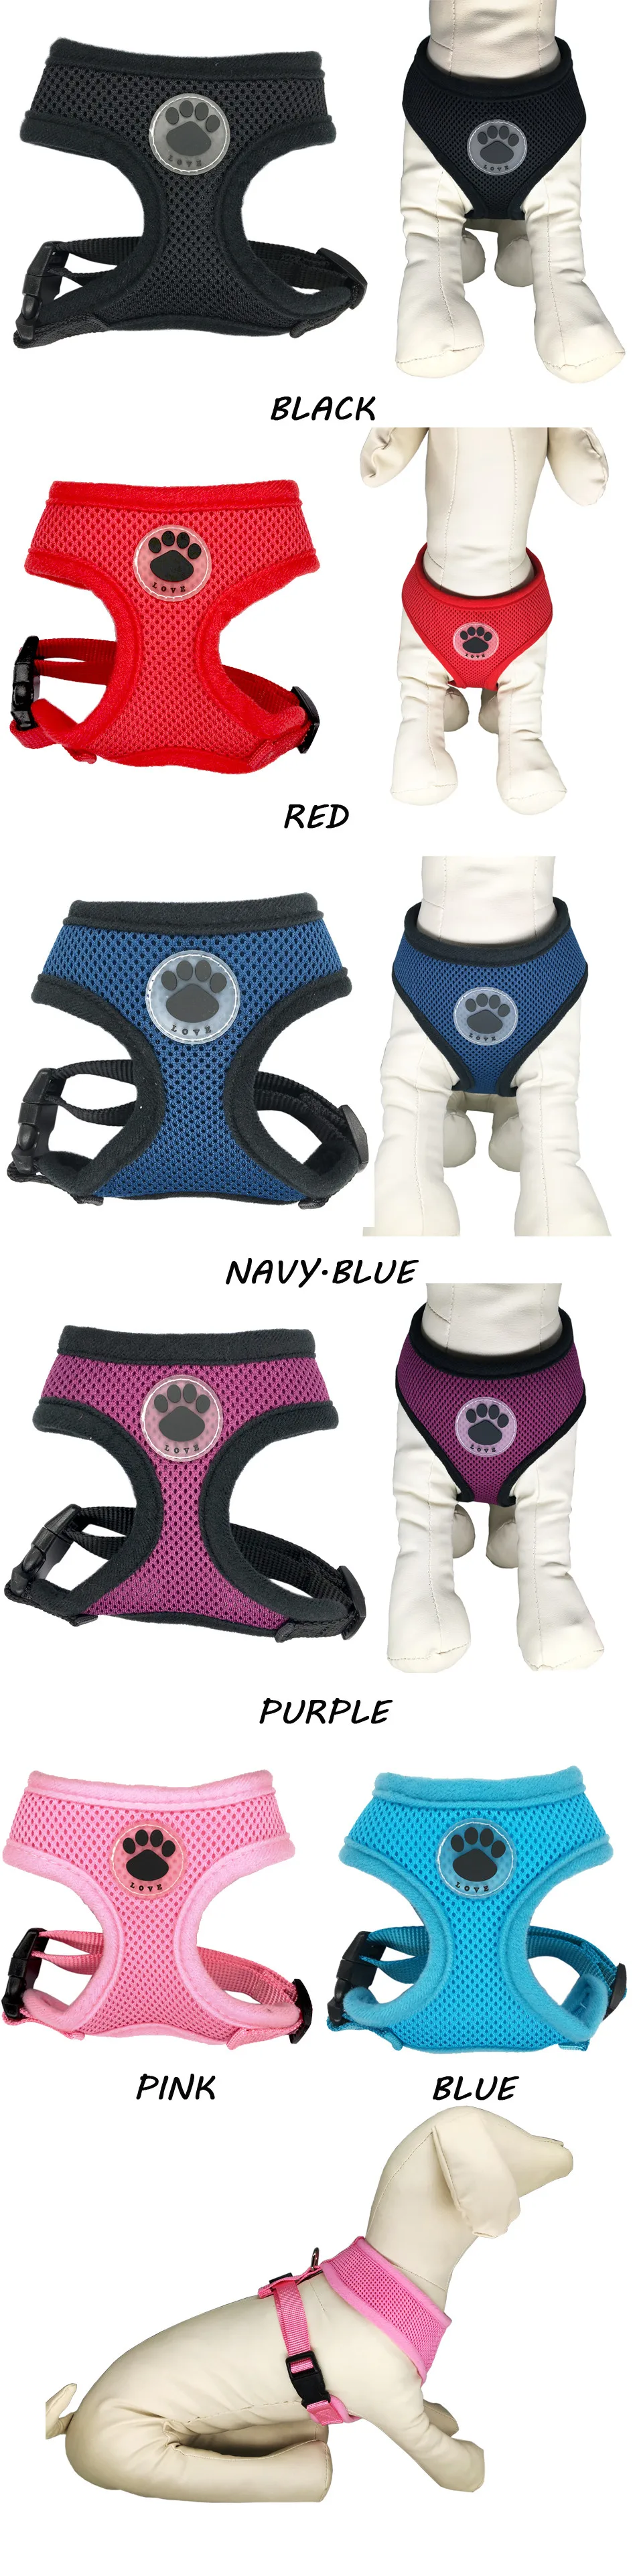 Breathable Dog Cat Control Harness